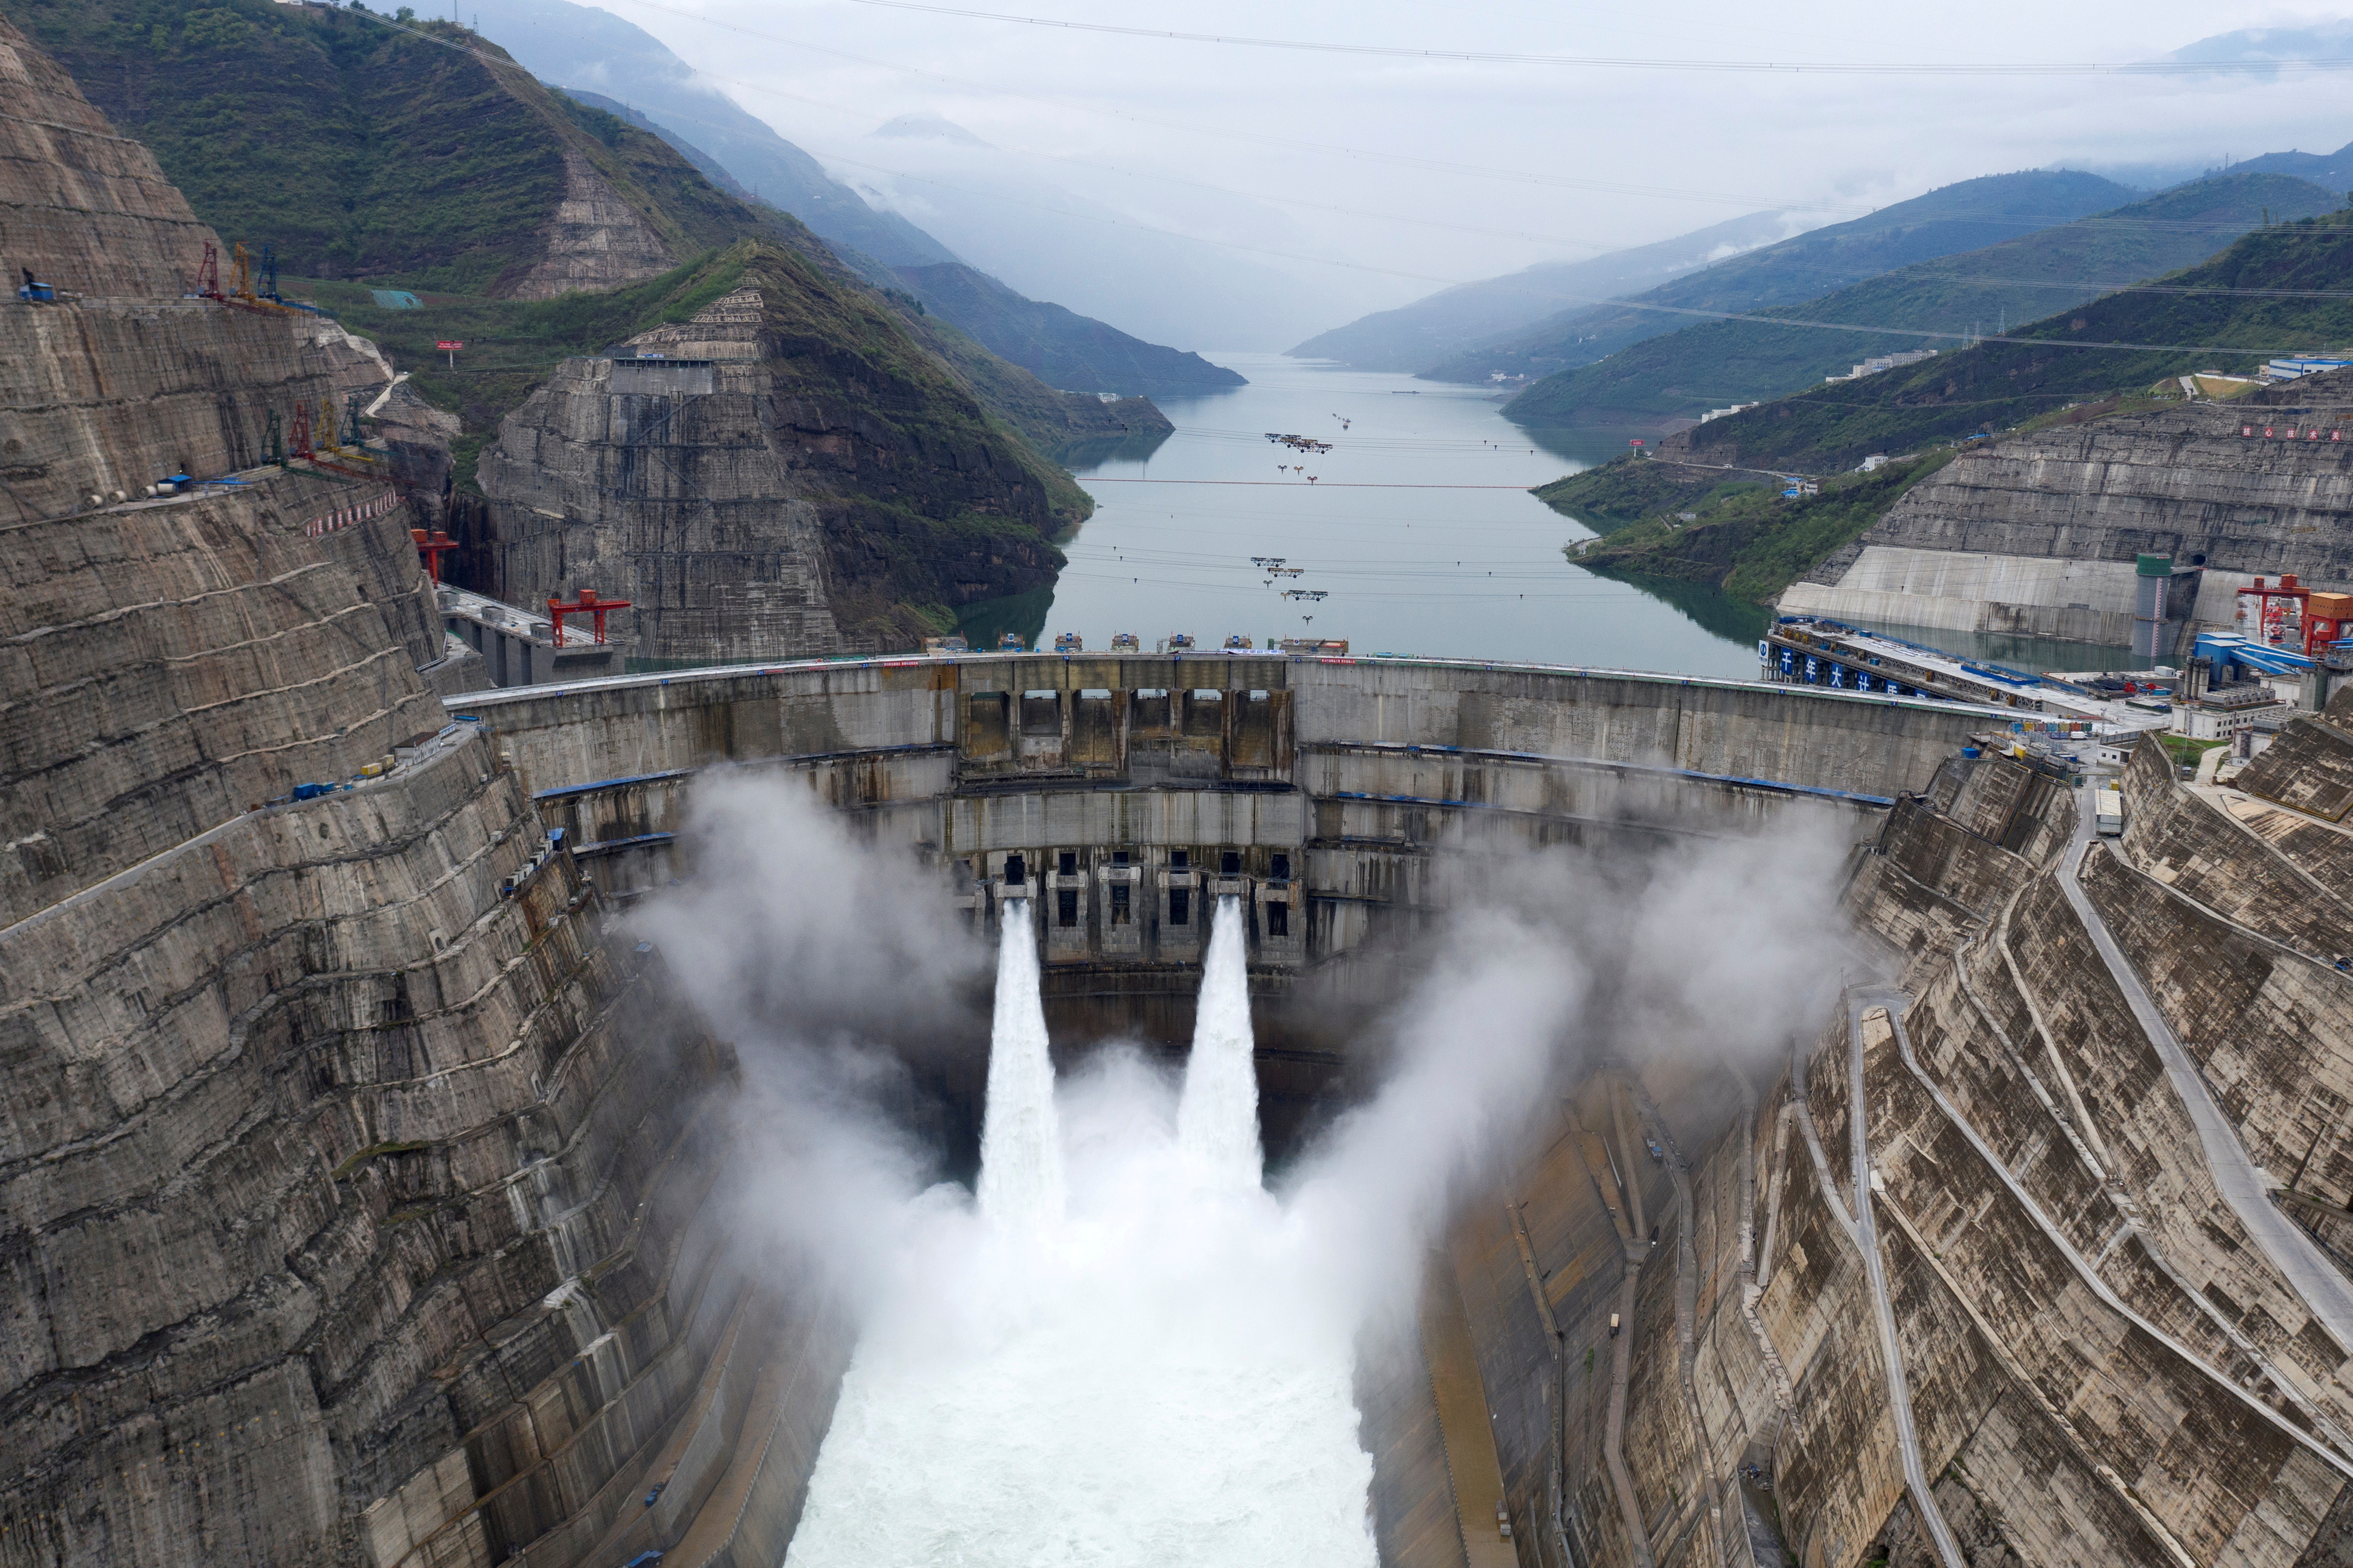 The Baihetan hydropower plant is seen in operation on the border between Yunnan province and Sichuan province